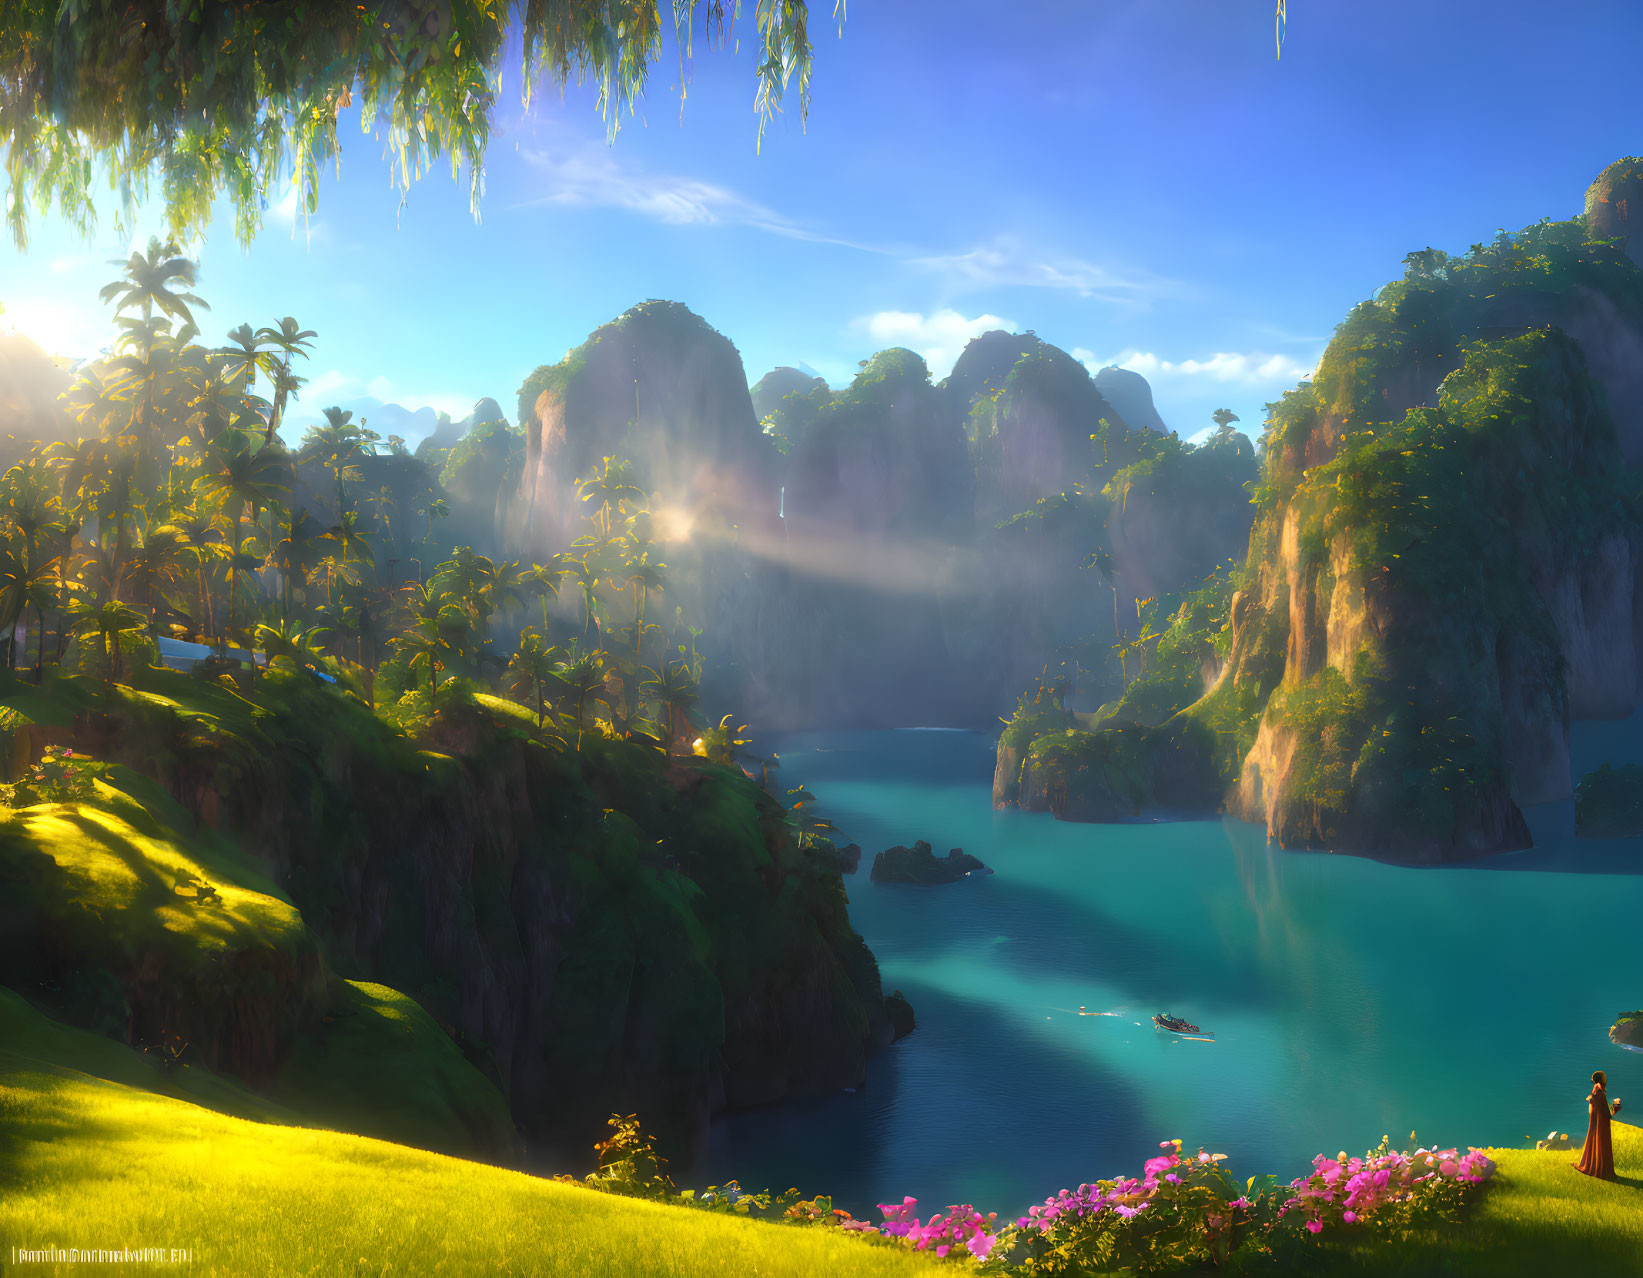 Tranquil landscape with lush greenery, towering cliffs, serene lake, sunshine, and a couple